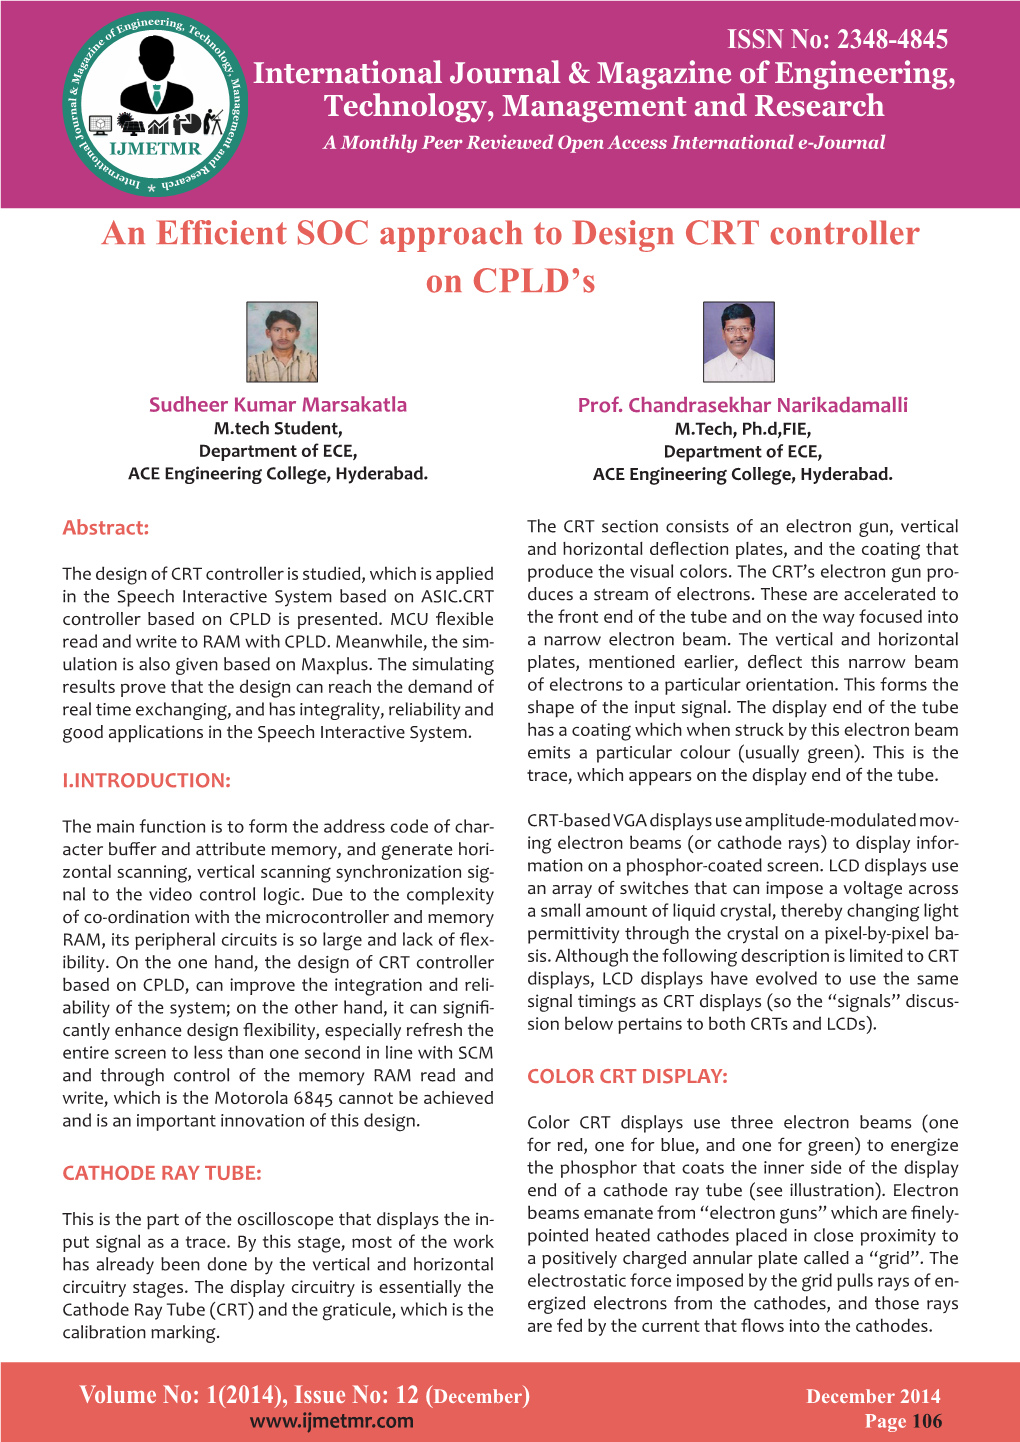 An Efficient SOC Approach to Design CRT Controller on CPLD's